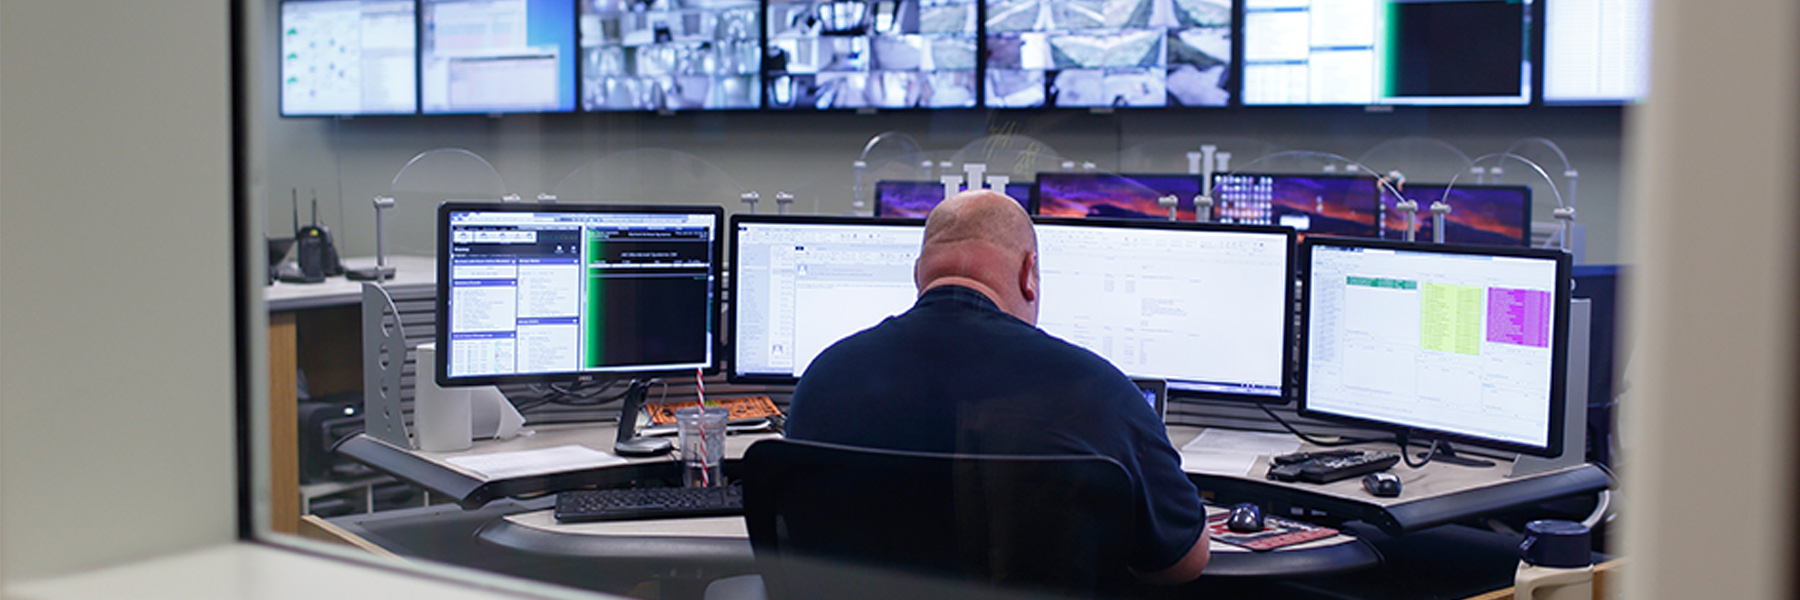 A security engineer works at the network operations monitoring center.